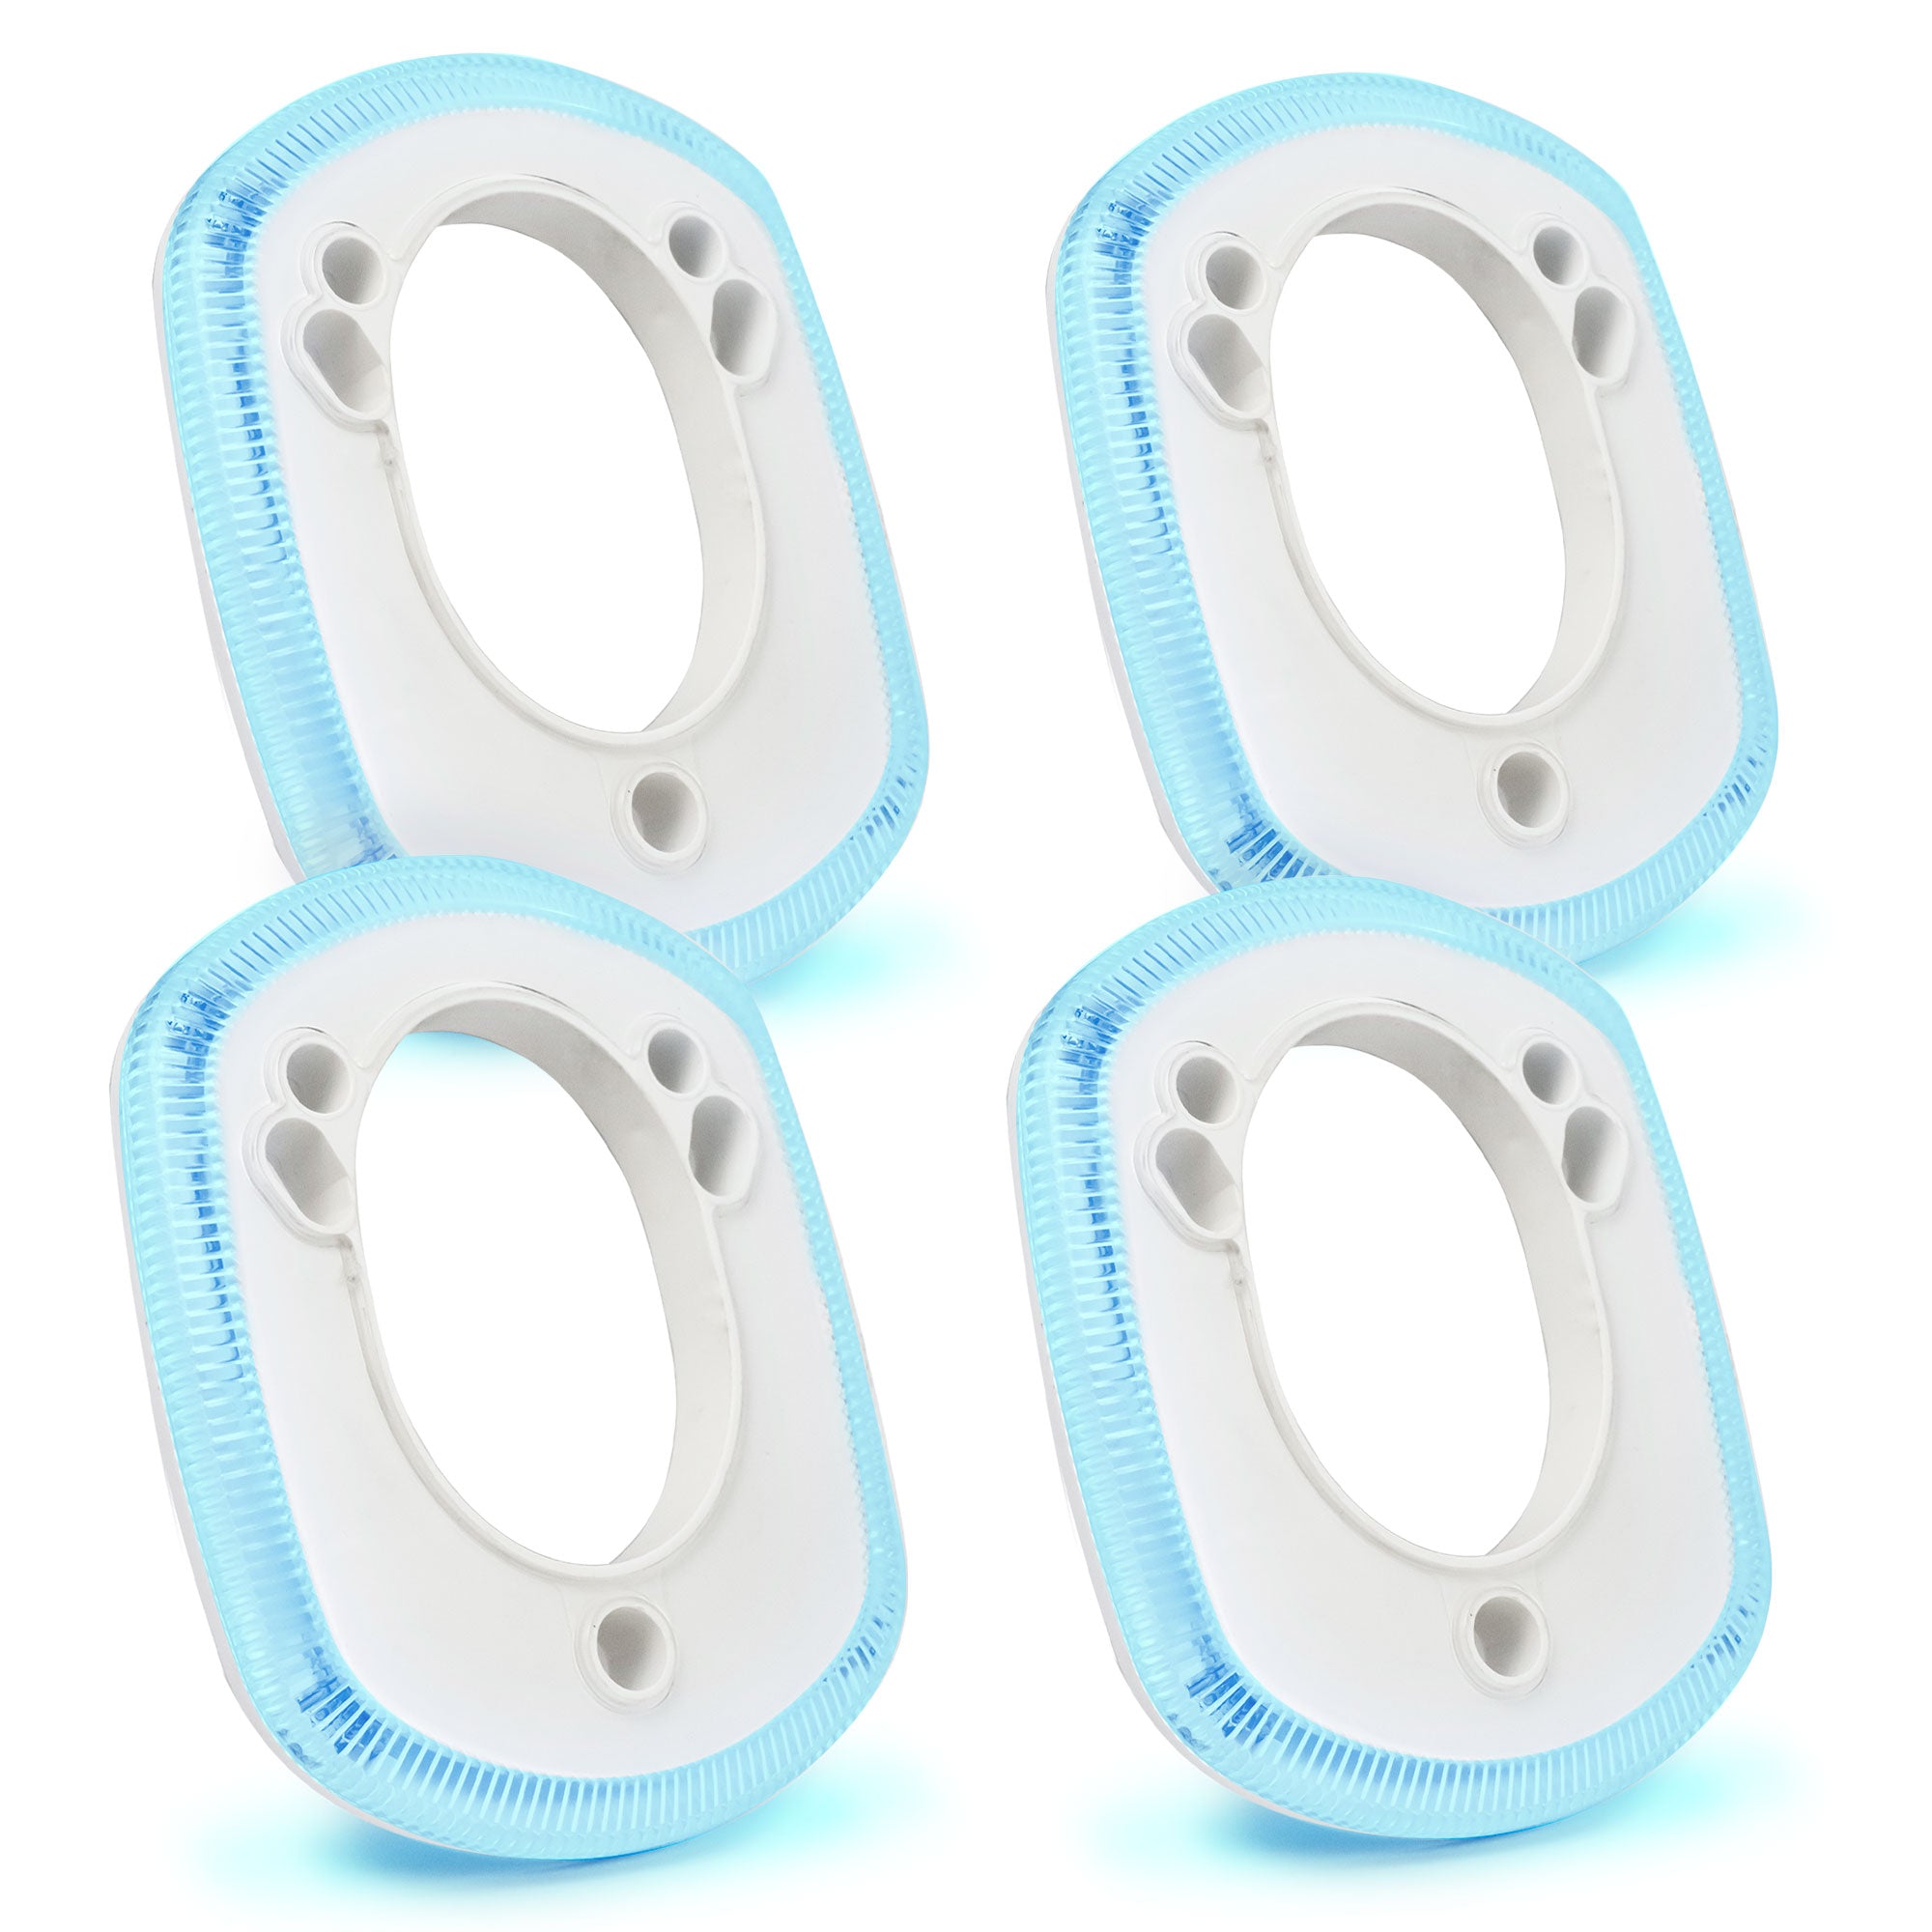 Blue LED Rod Holder Accent Bezel Ring, Fits All Five Oceans/Most Standard Rod Holders, Grade Marine Durable Materials, 12 Volts, 4-Pack, FO-4433-M4